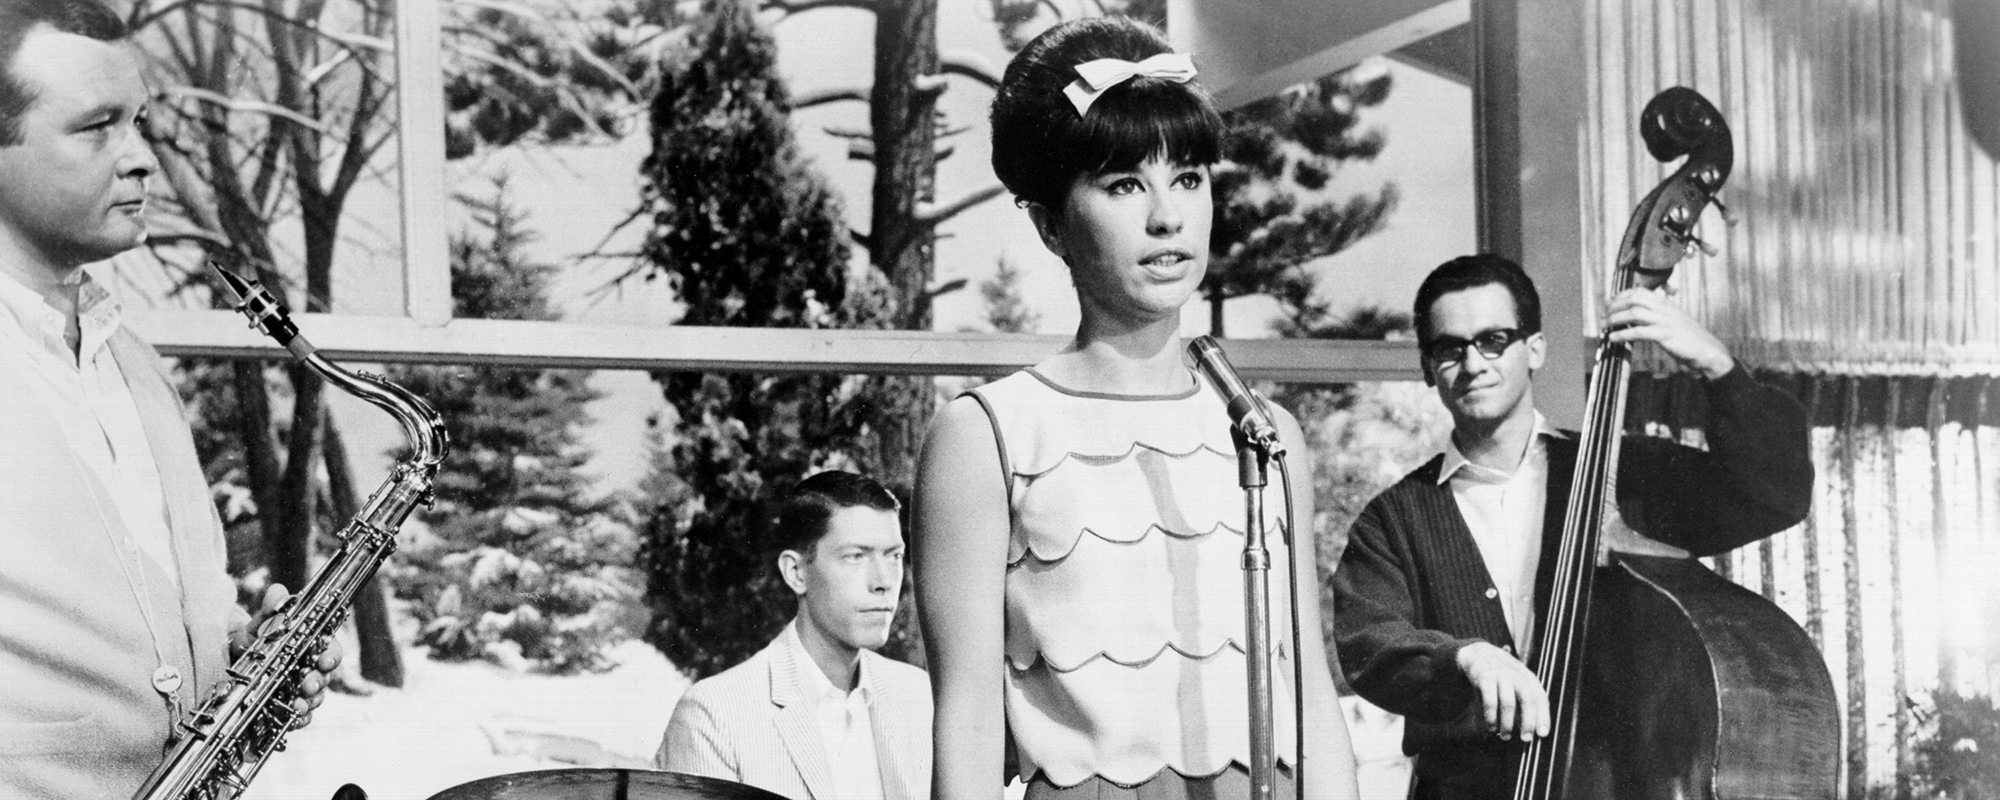 Astrud Gilberto, Singer of “The Girl from Ipanema” Dies at 83